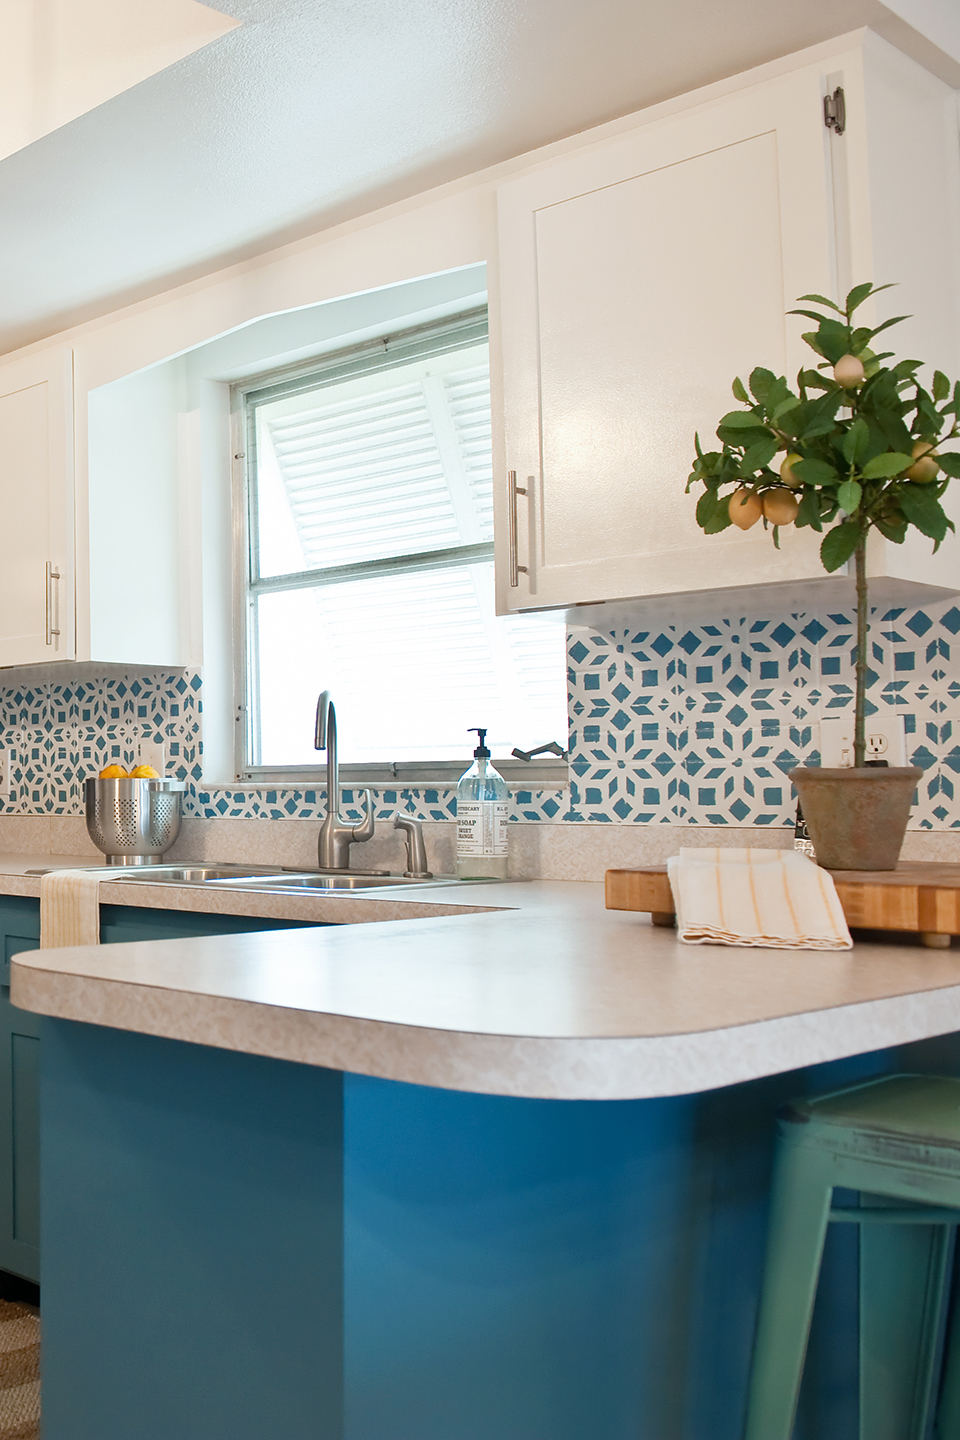 A Budget-Friendly Kitchen Makeover with Turquoise Cabinets & Open